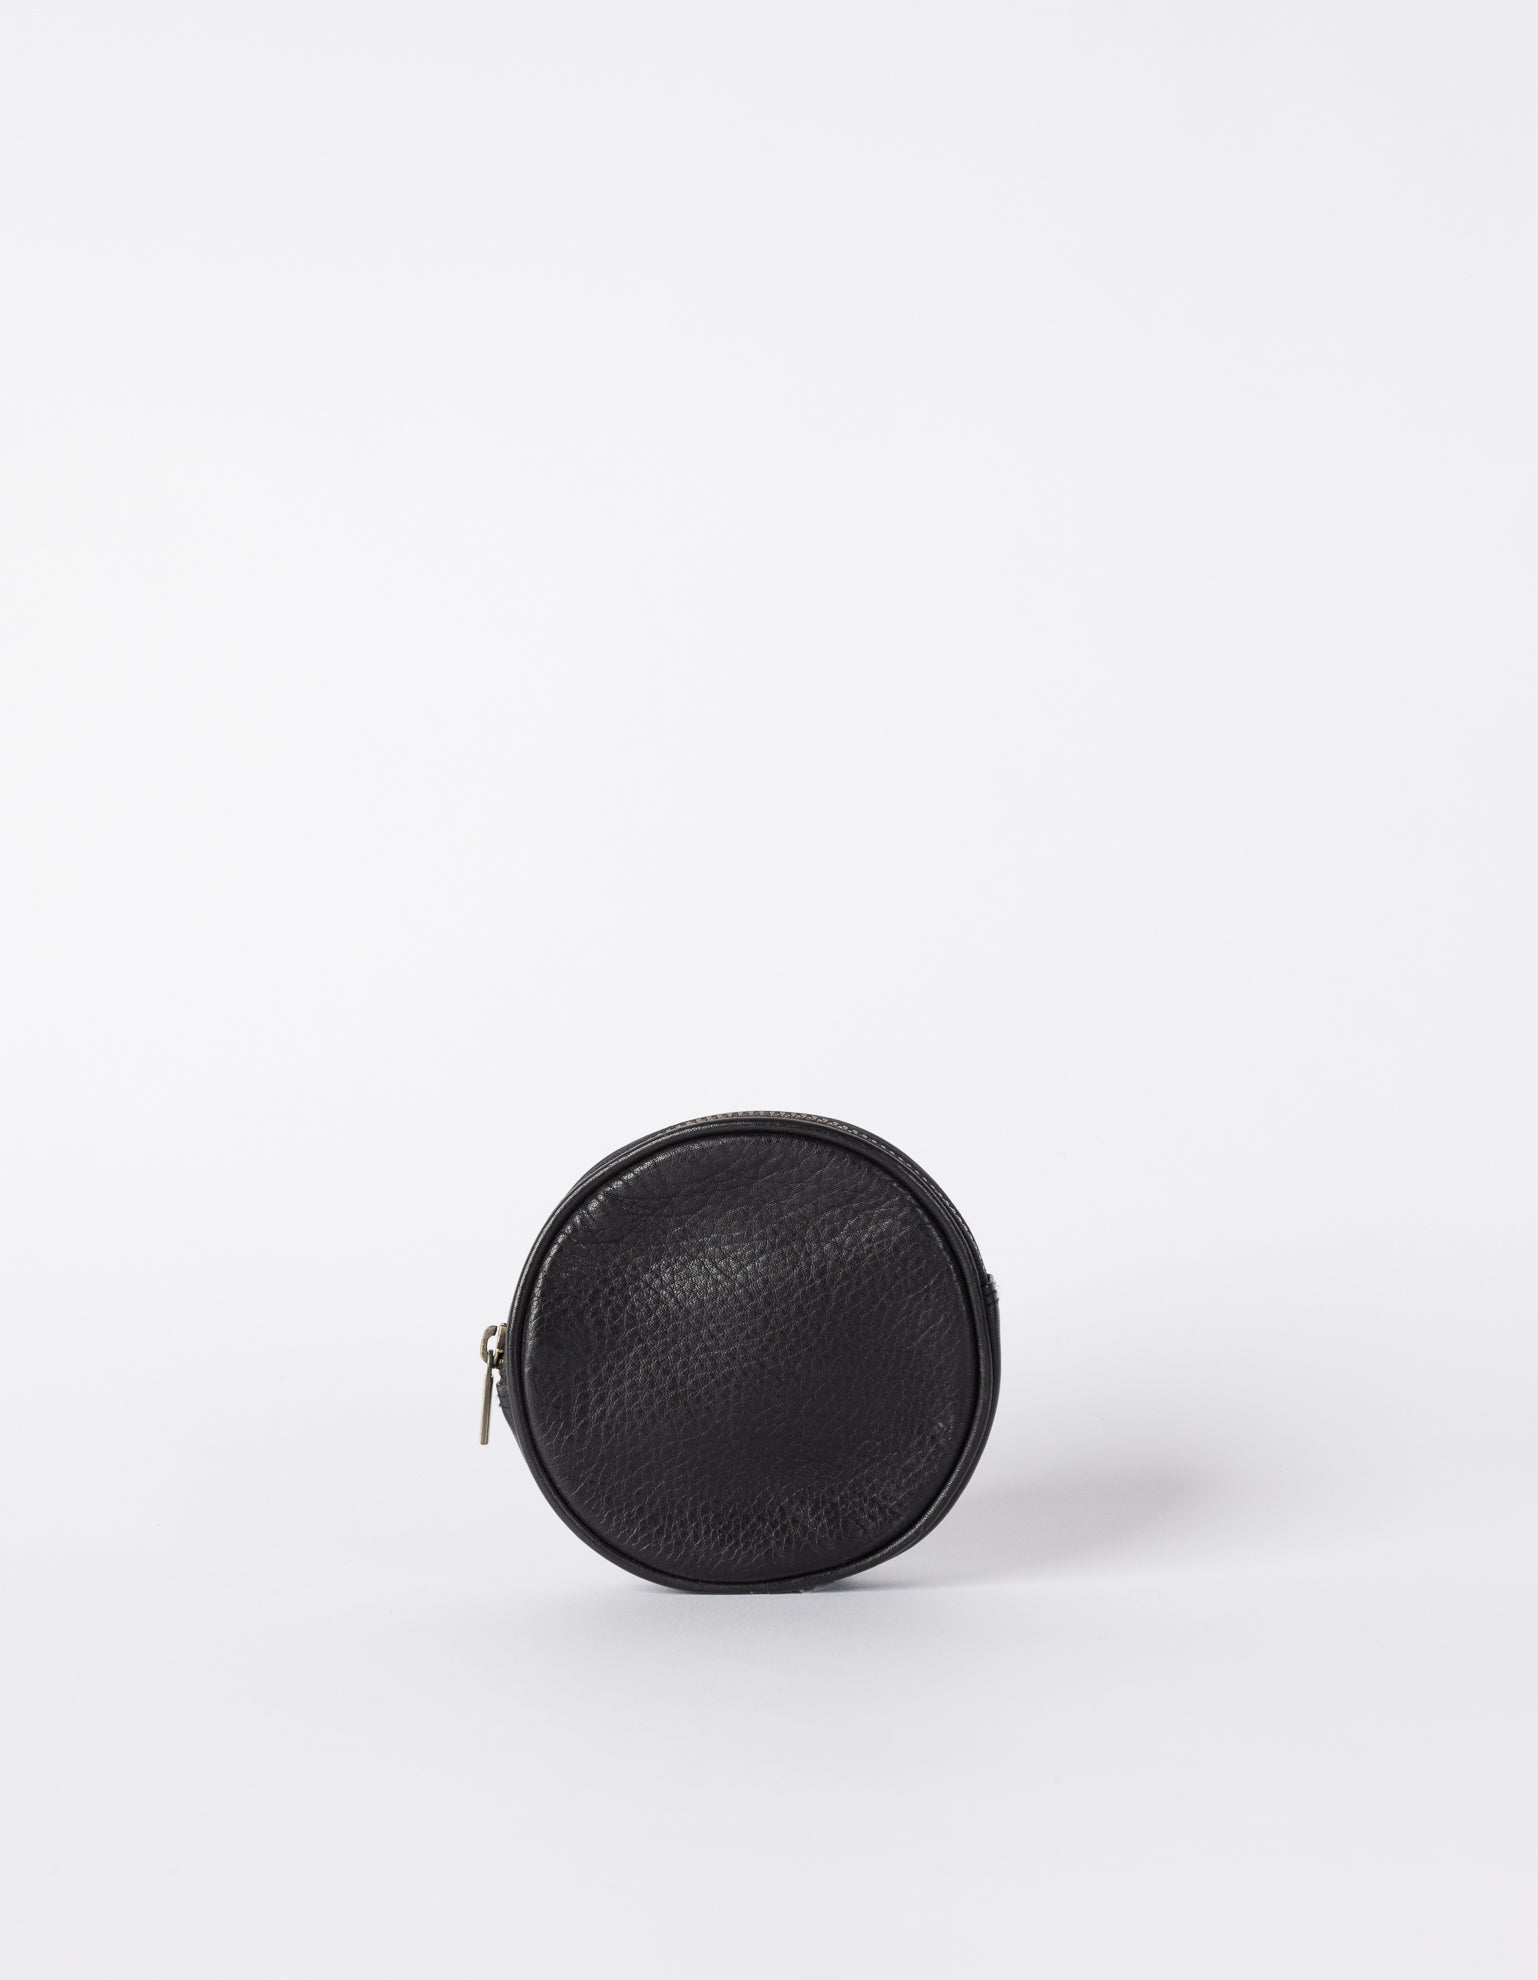 Luna Purse Black Soft Grain Leather. Circular coin purse, wallet for men and women. Back product image.